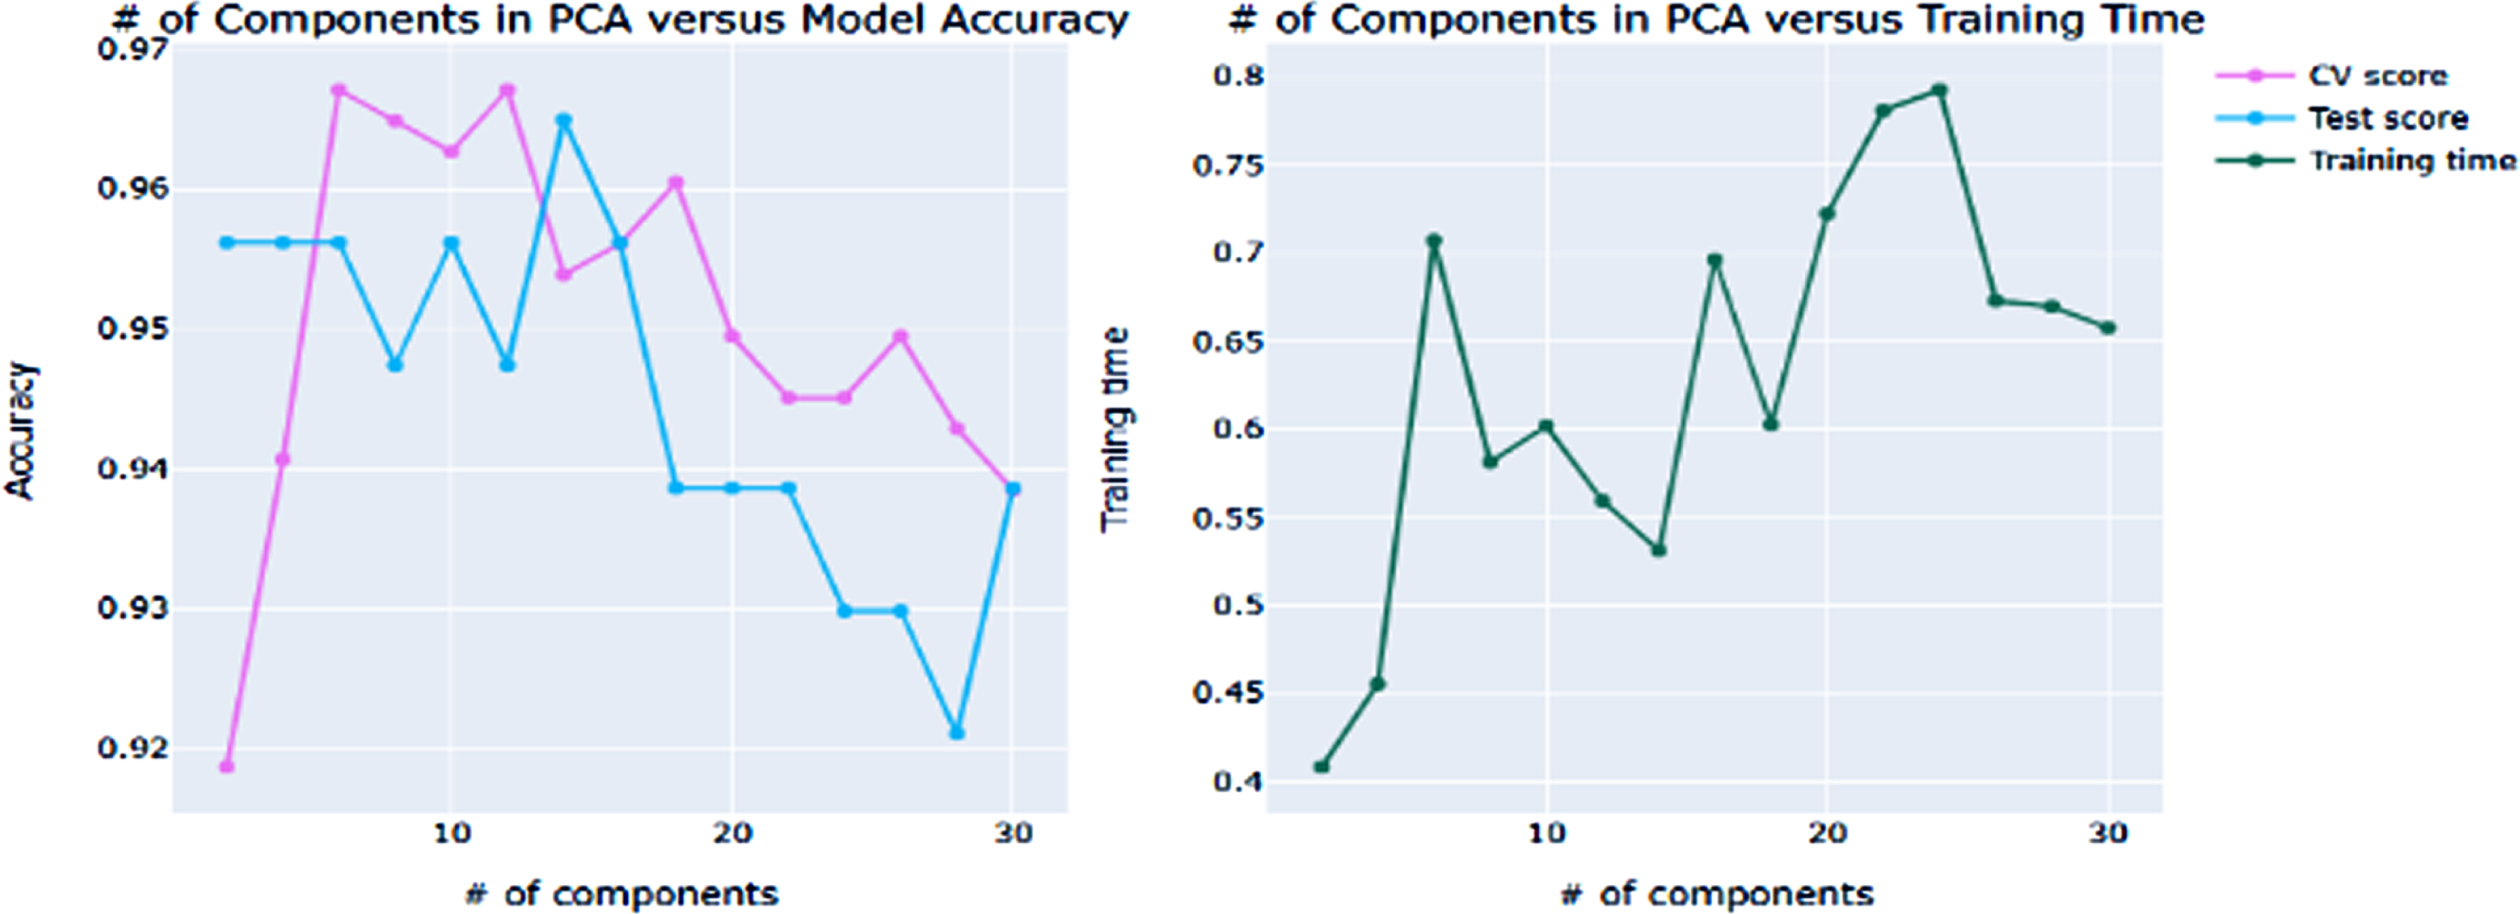 RF-PCA model performance score between no_of_components in PCA and model accuracy/Training Time.